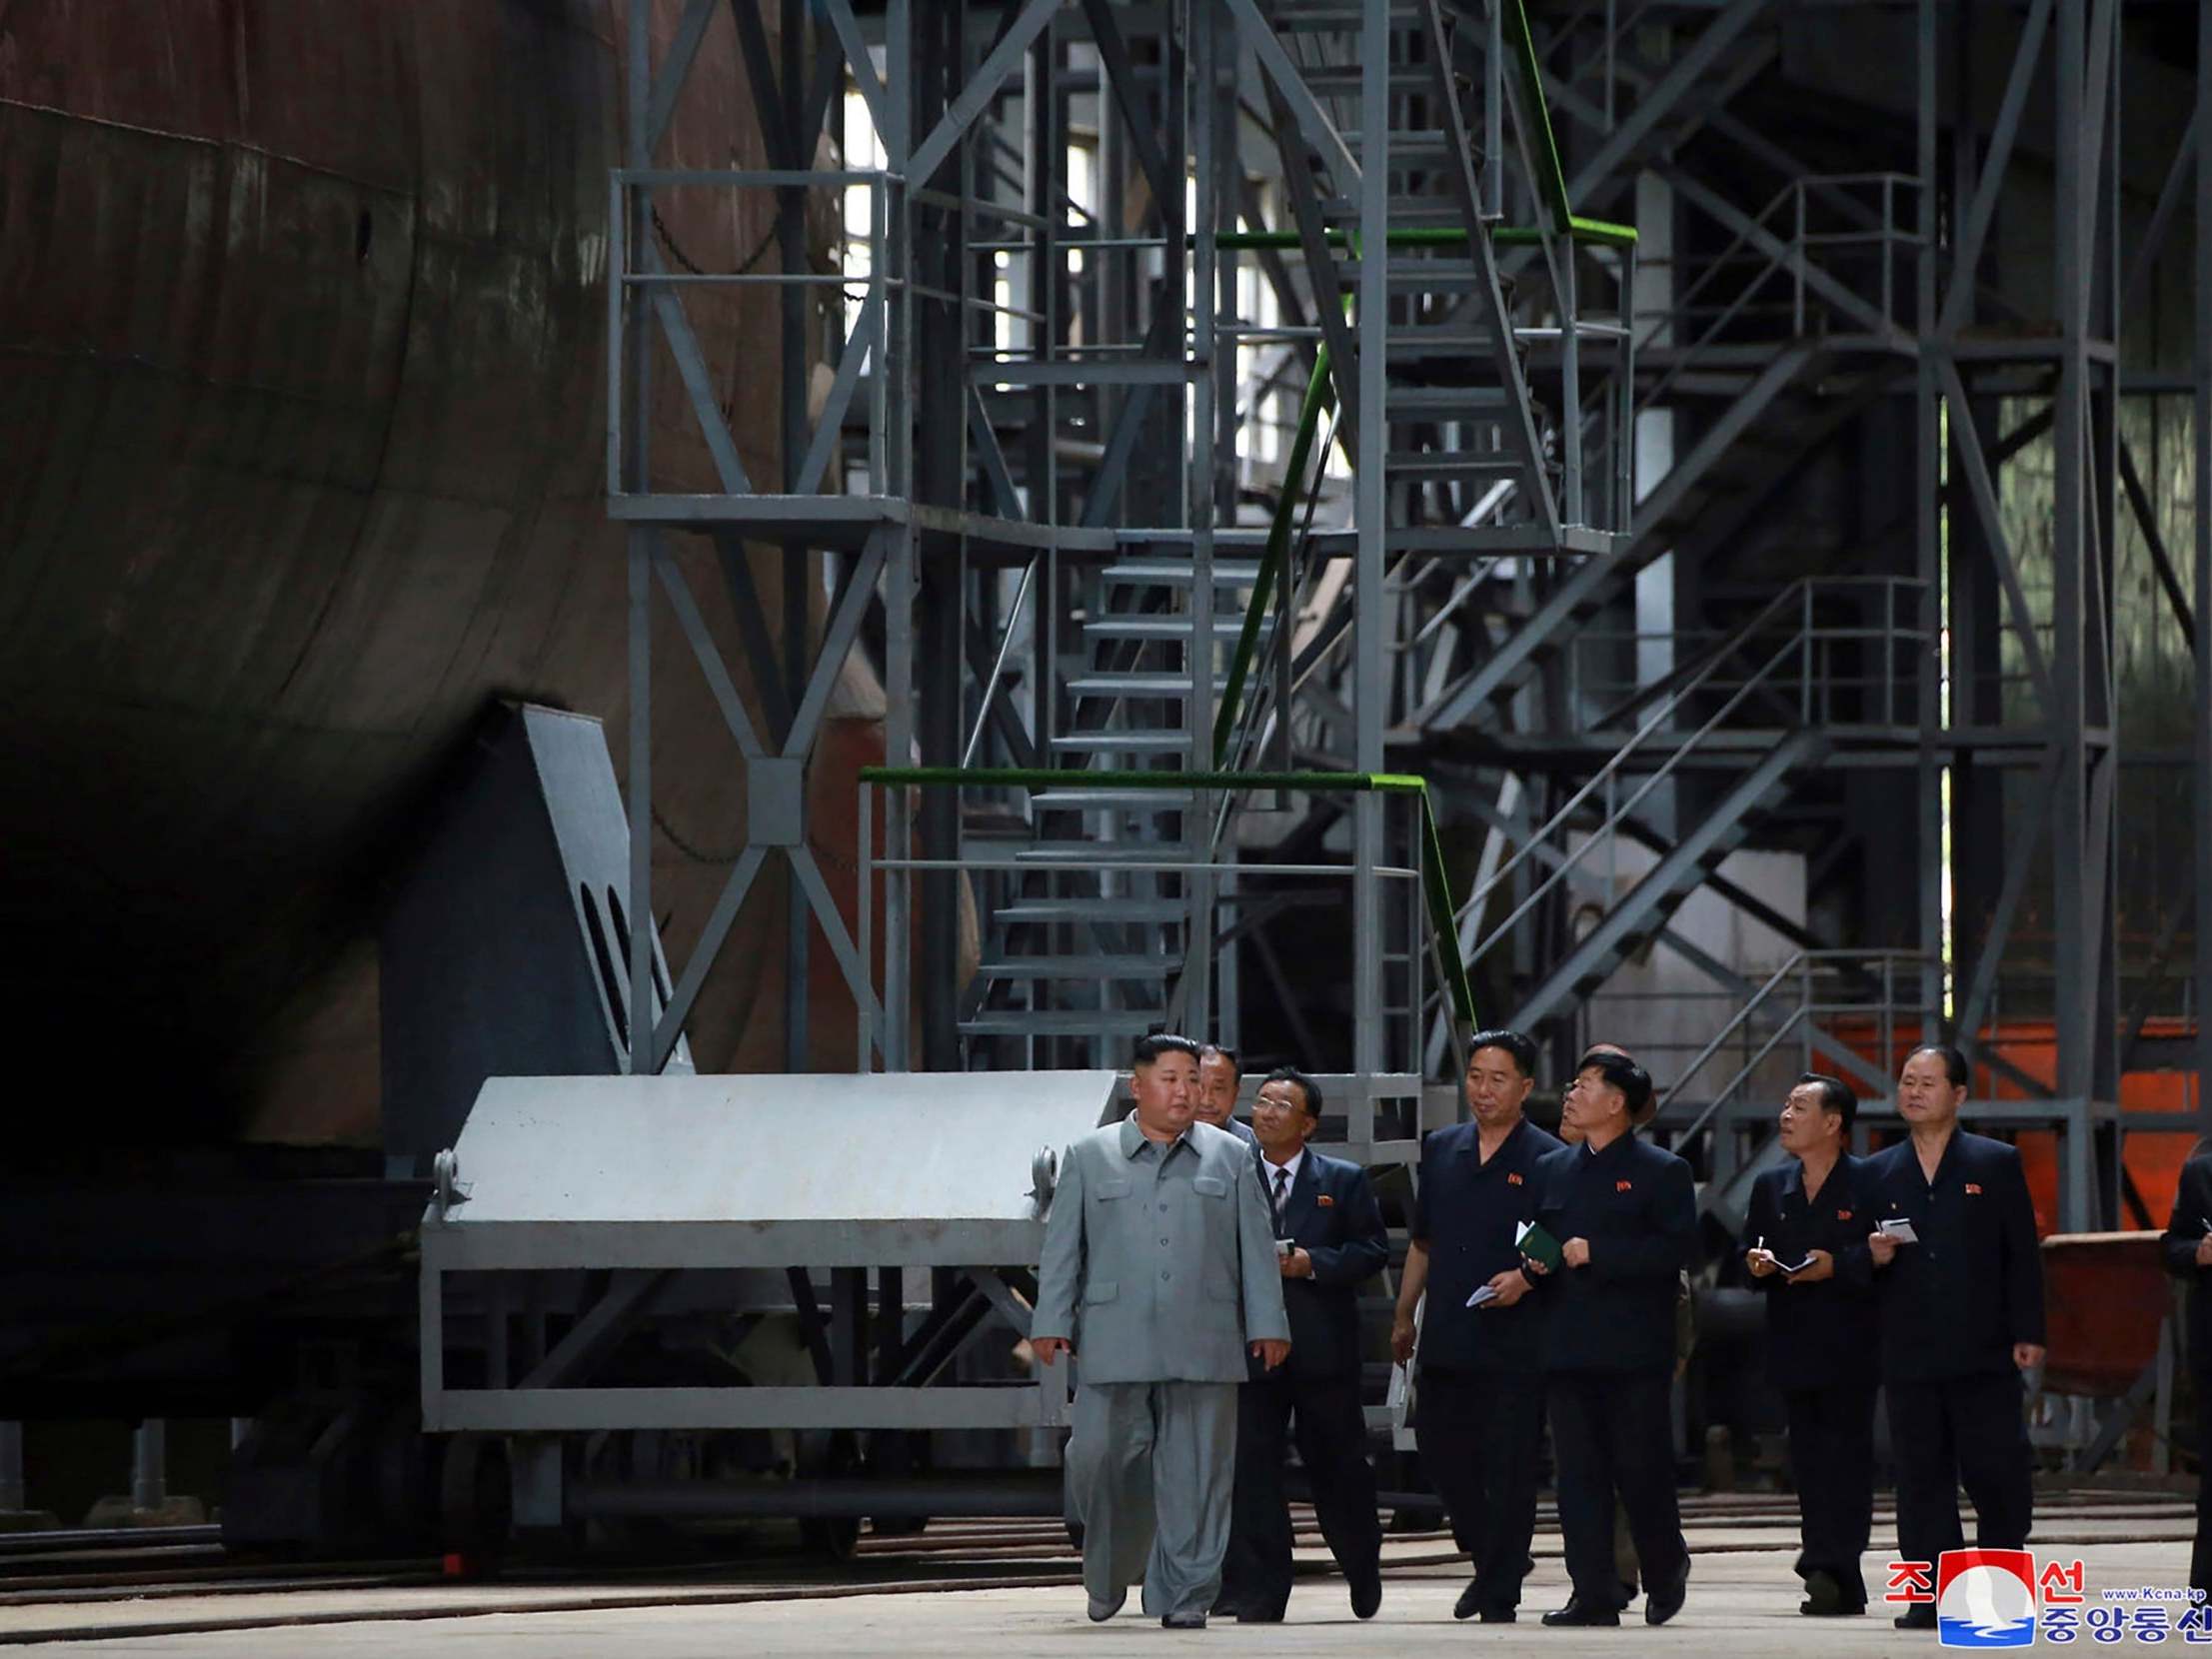 Kim Jong-un inspects a newly built submarine to be deployed at an unknown location in North Korea